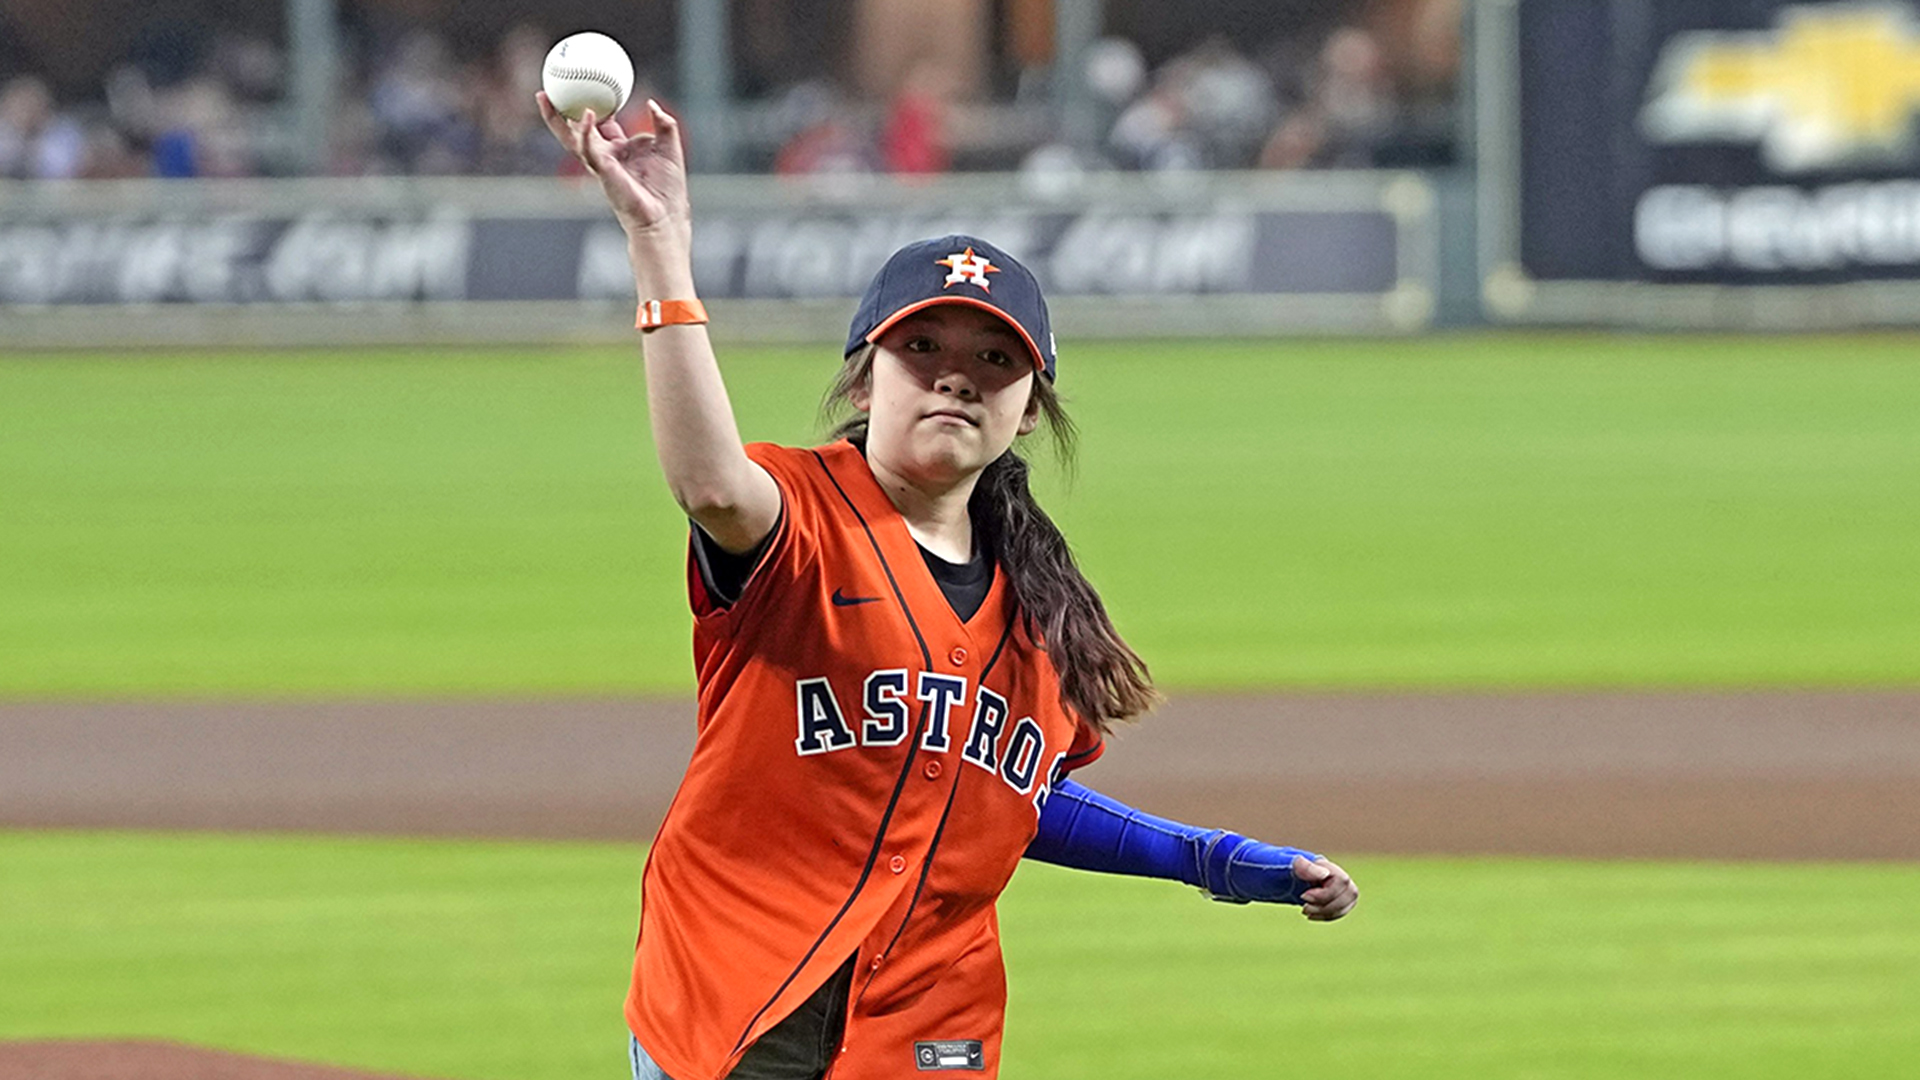 2019 auditions open to become Houston Astros Shooting Star - ABC13